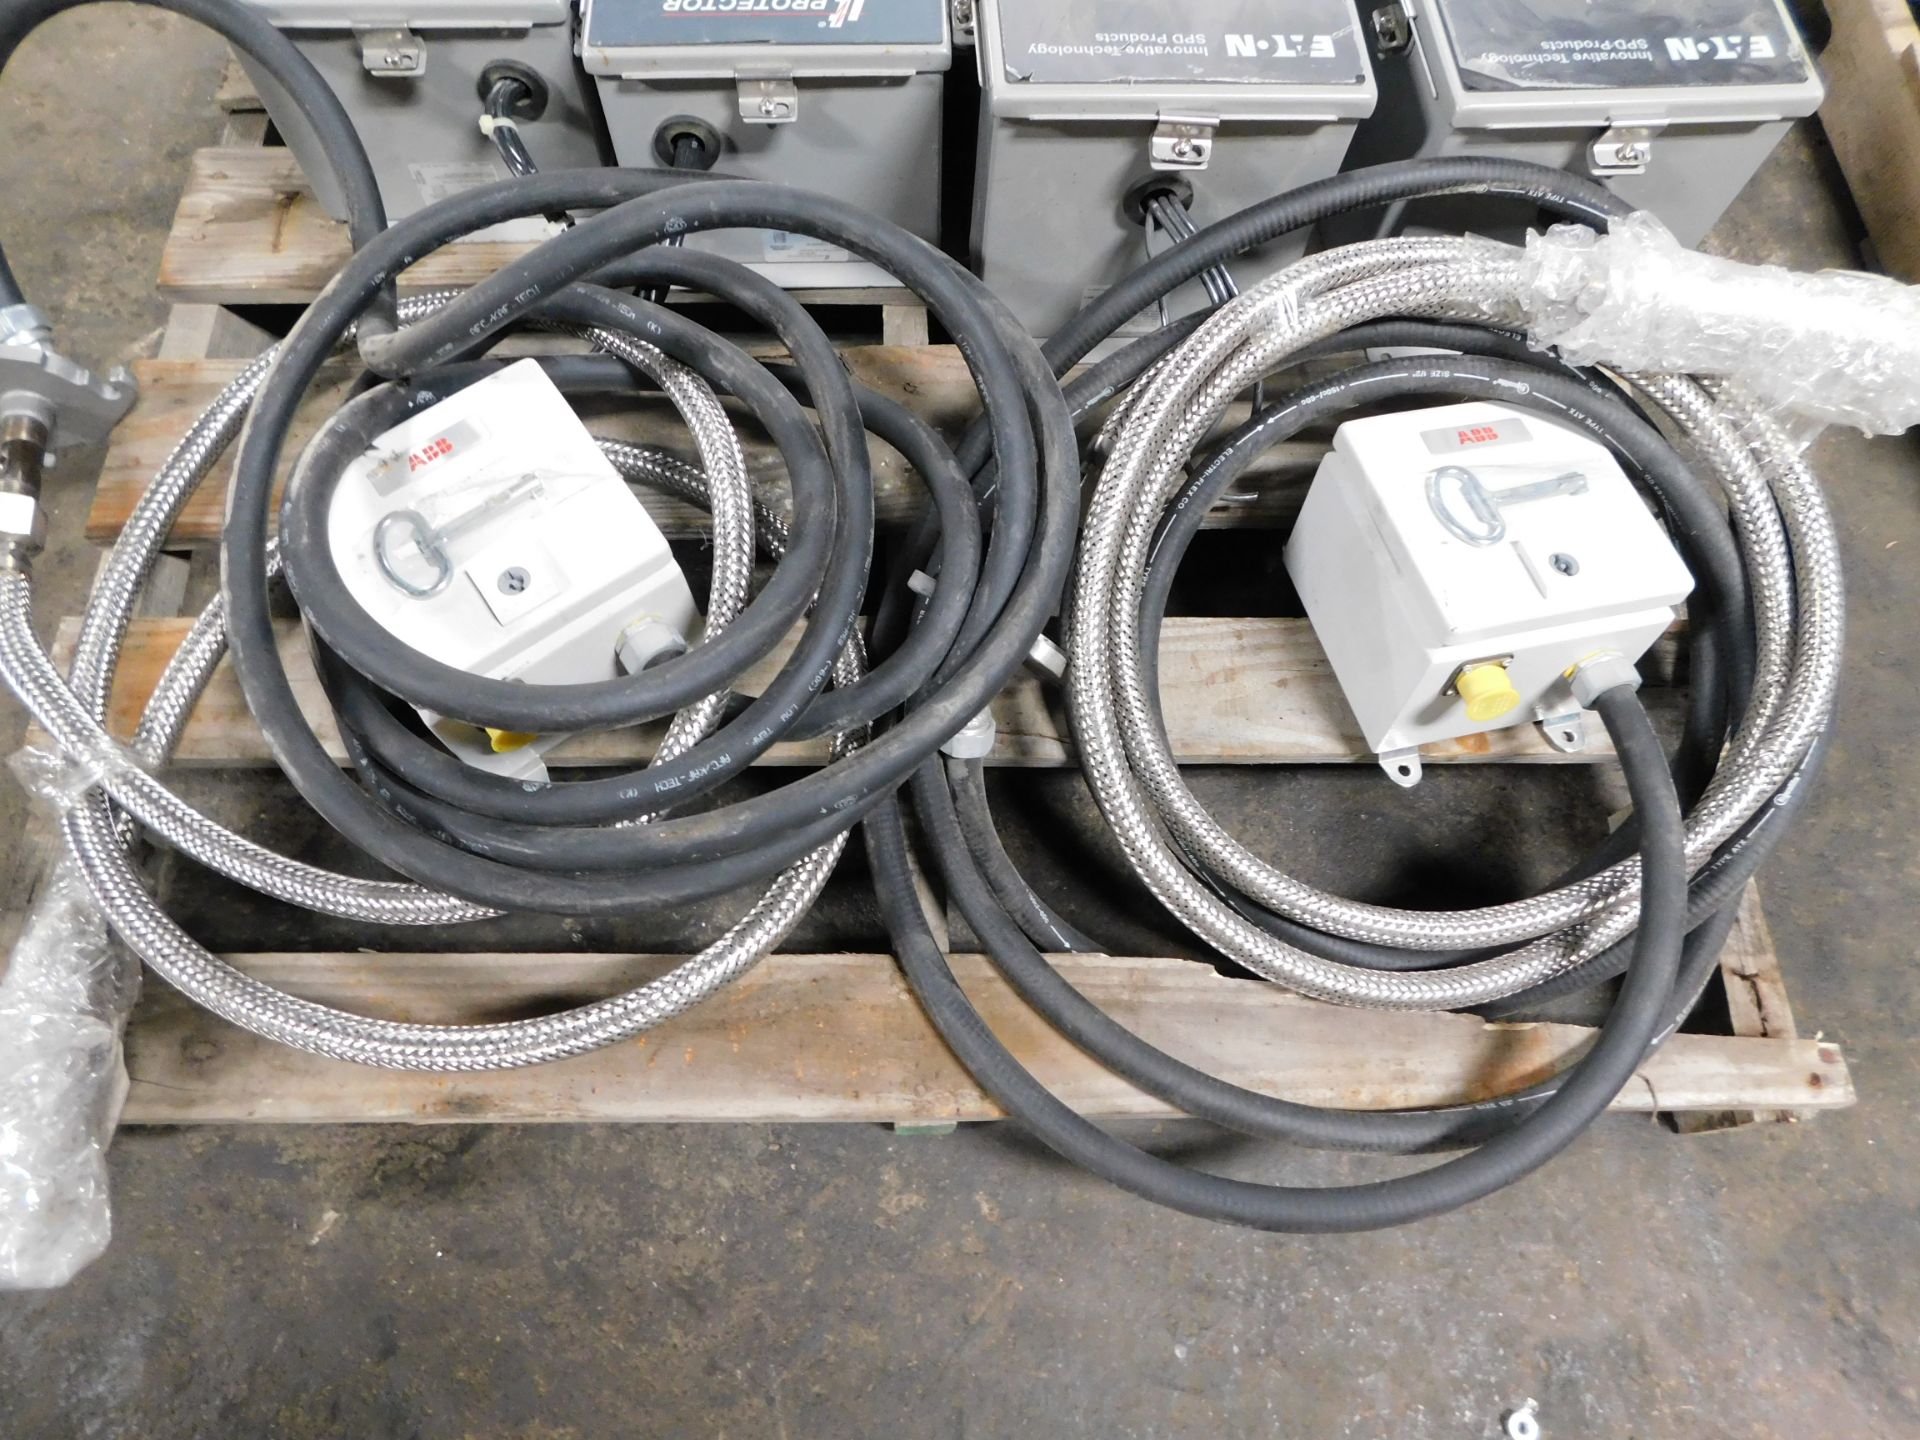 Pallet of Misc. Electrical - PTX300 Surge Protectors / Suppressors & ABB Switchgear Power Supplies - Image 3 of 3